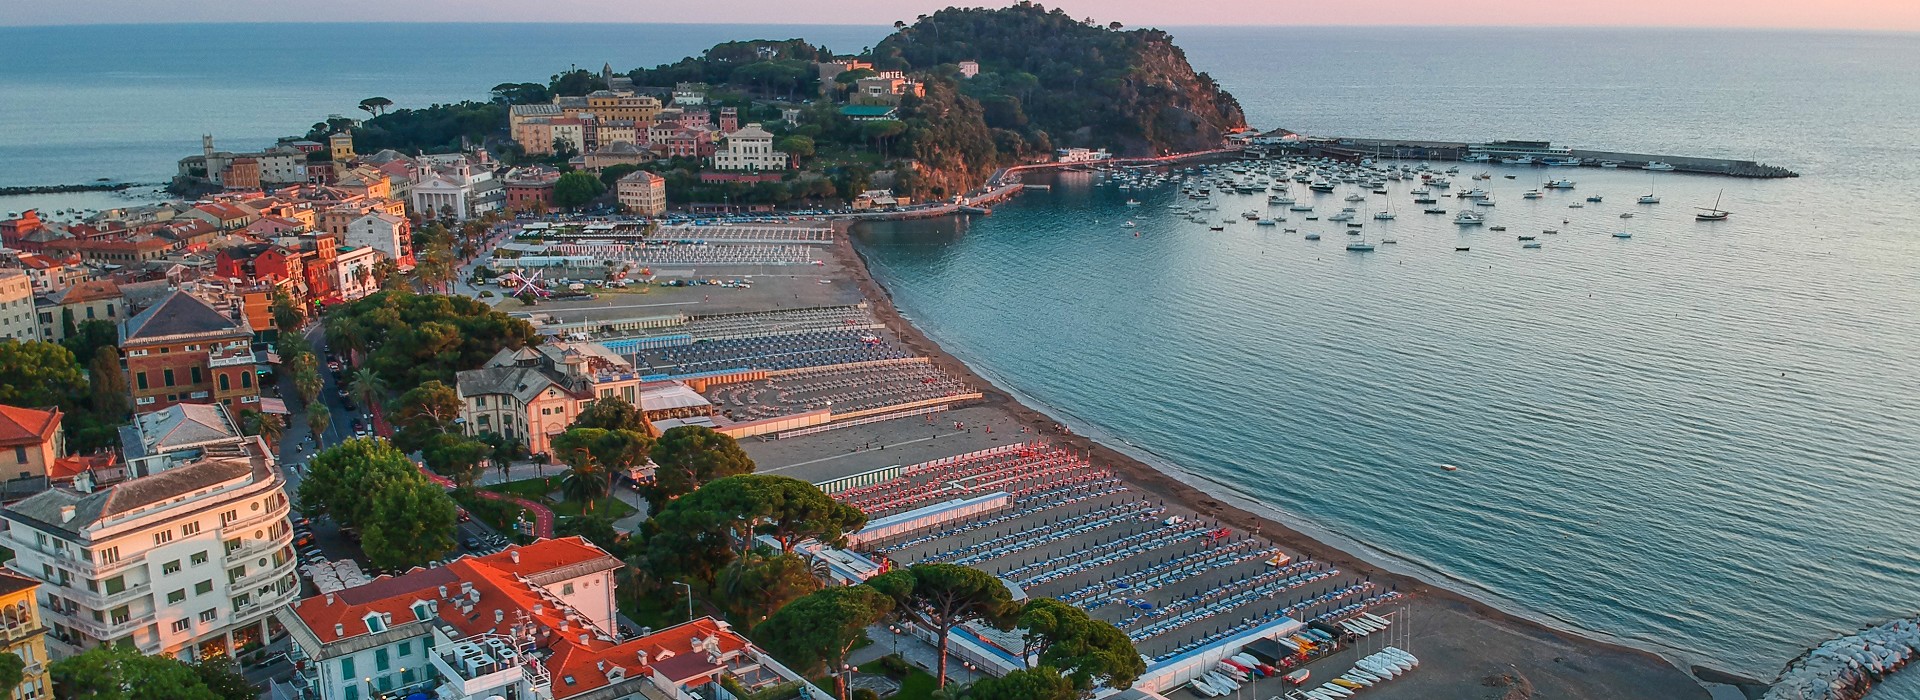 Sestri Levante Holiday and Vacation in one of the most beautiful little towns of Ligurian Riviera